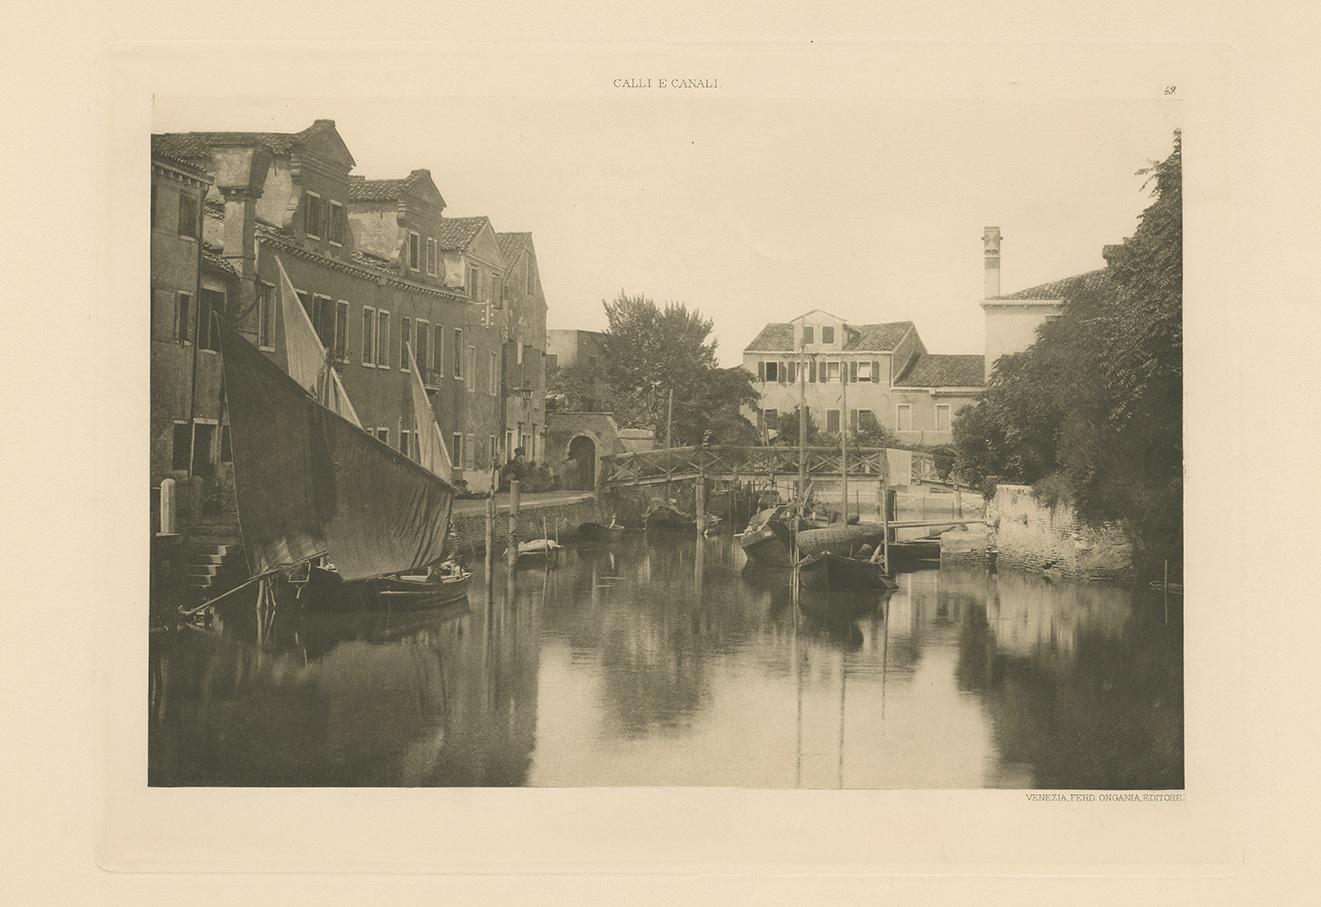 Photogravure of a canal in the Giudecca Island of Venice, Italy. Giudecca is an island in the Venetian Lagoon, in northern Italy. It is part of the sestiere of Dorsoduro and is a locality of the comune of Venice.

This print originates from 'Calli